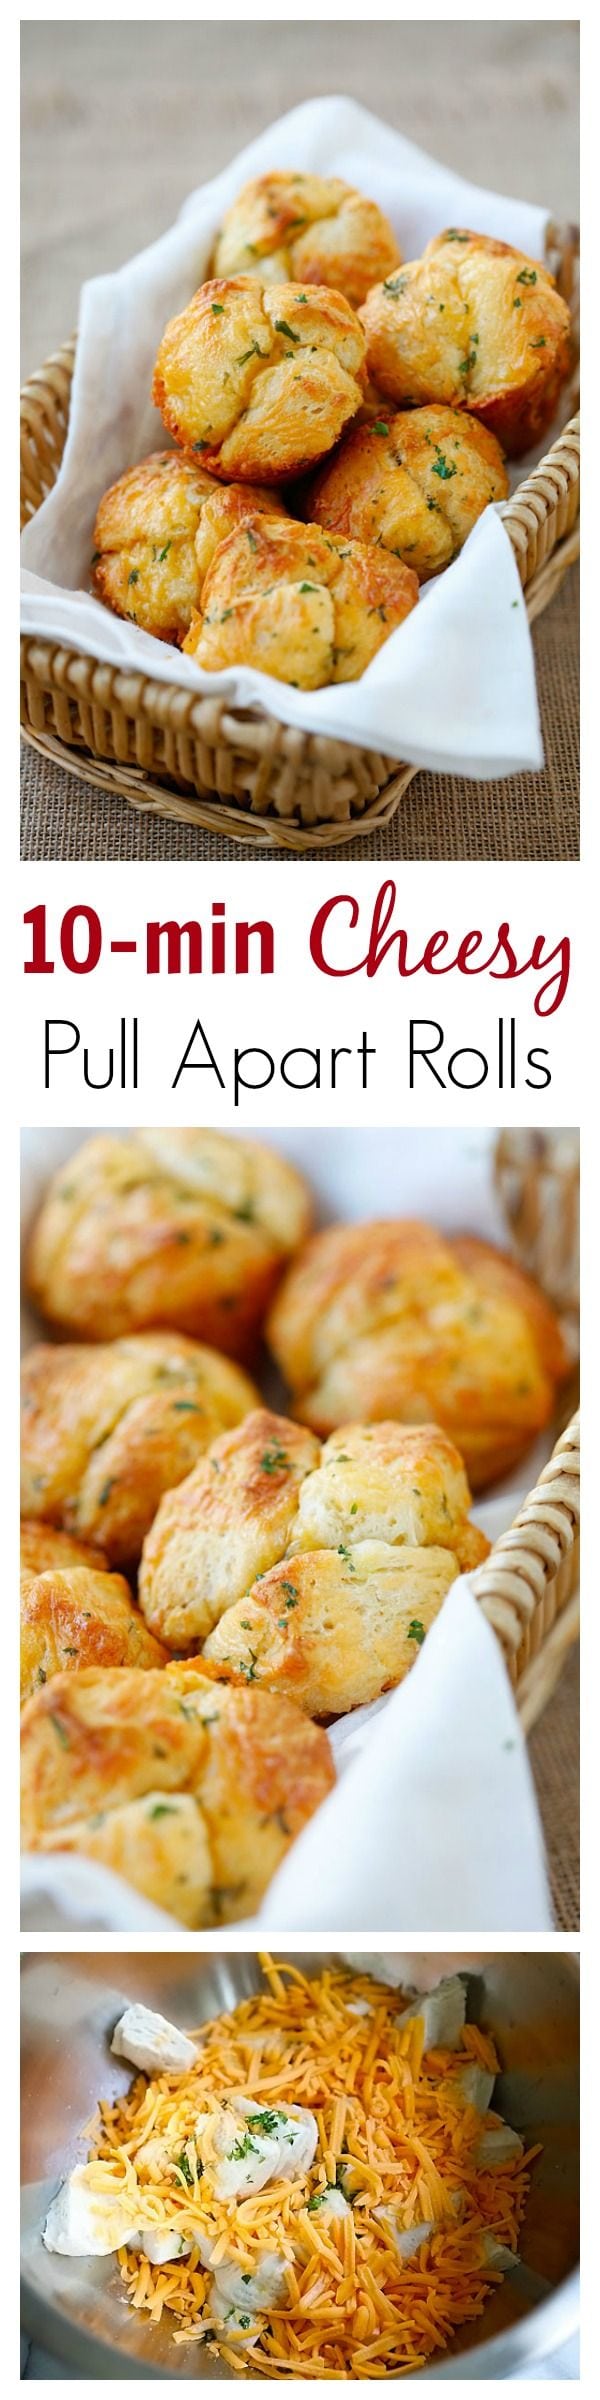 Easy Cheesy Pull-Apart Rolls – 10 mins pull-apart rolls recipe that is loaded with cheddar cheese and butter, soft, fluffy, and super yummy | rasamalaysia.com